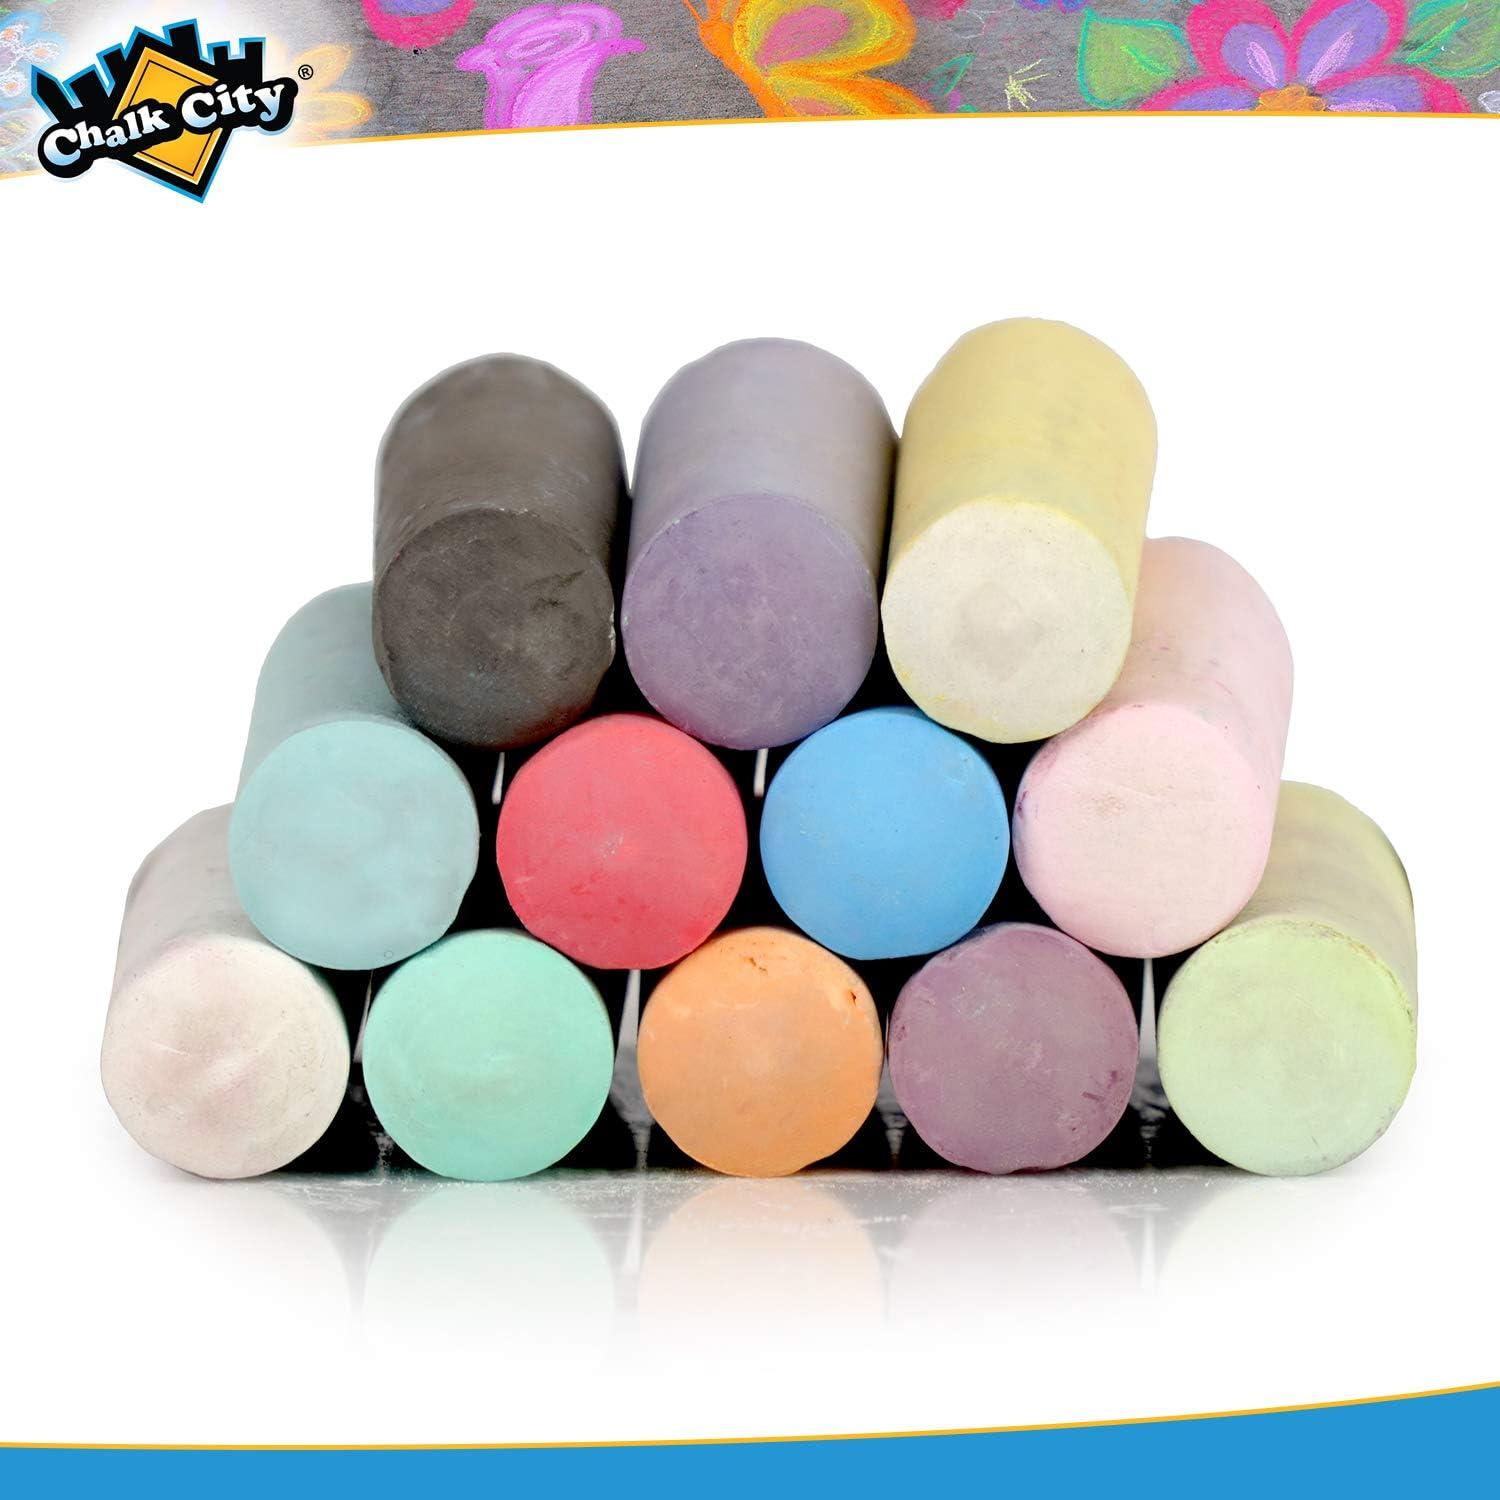  Urban Infant Non-Toxic Sidewalk Chalk for Toddlers 1